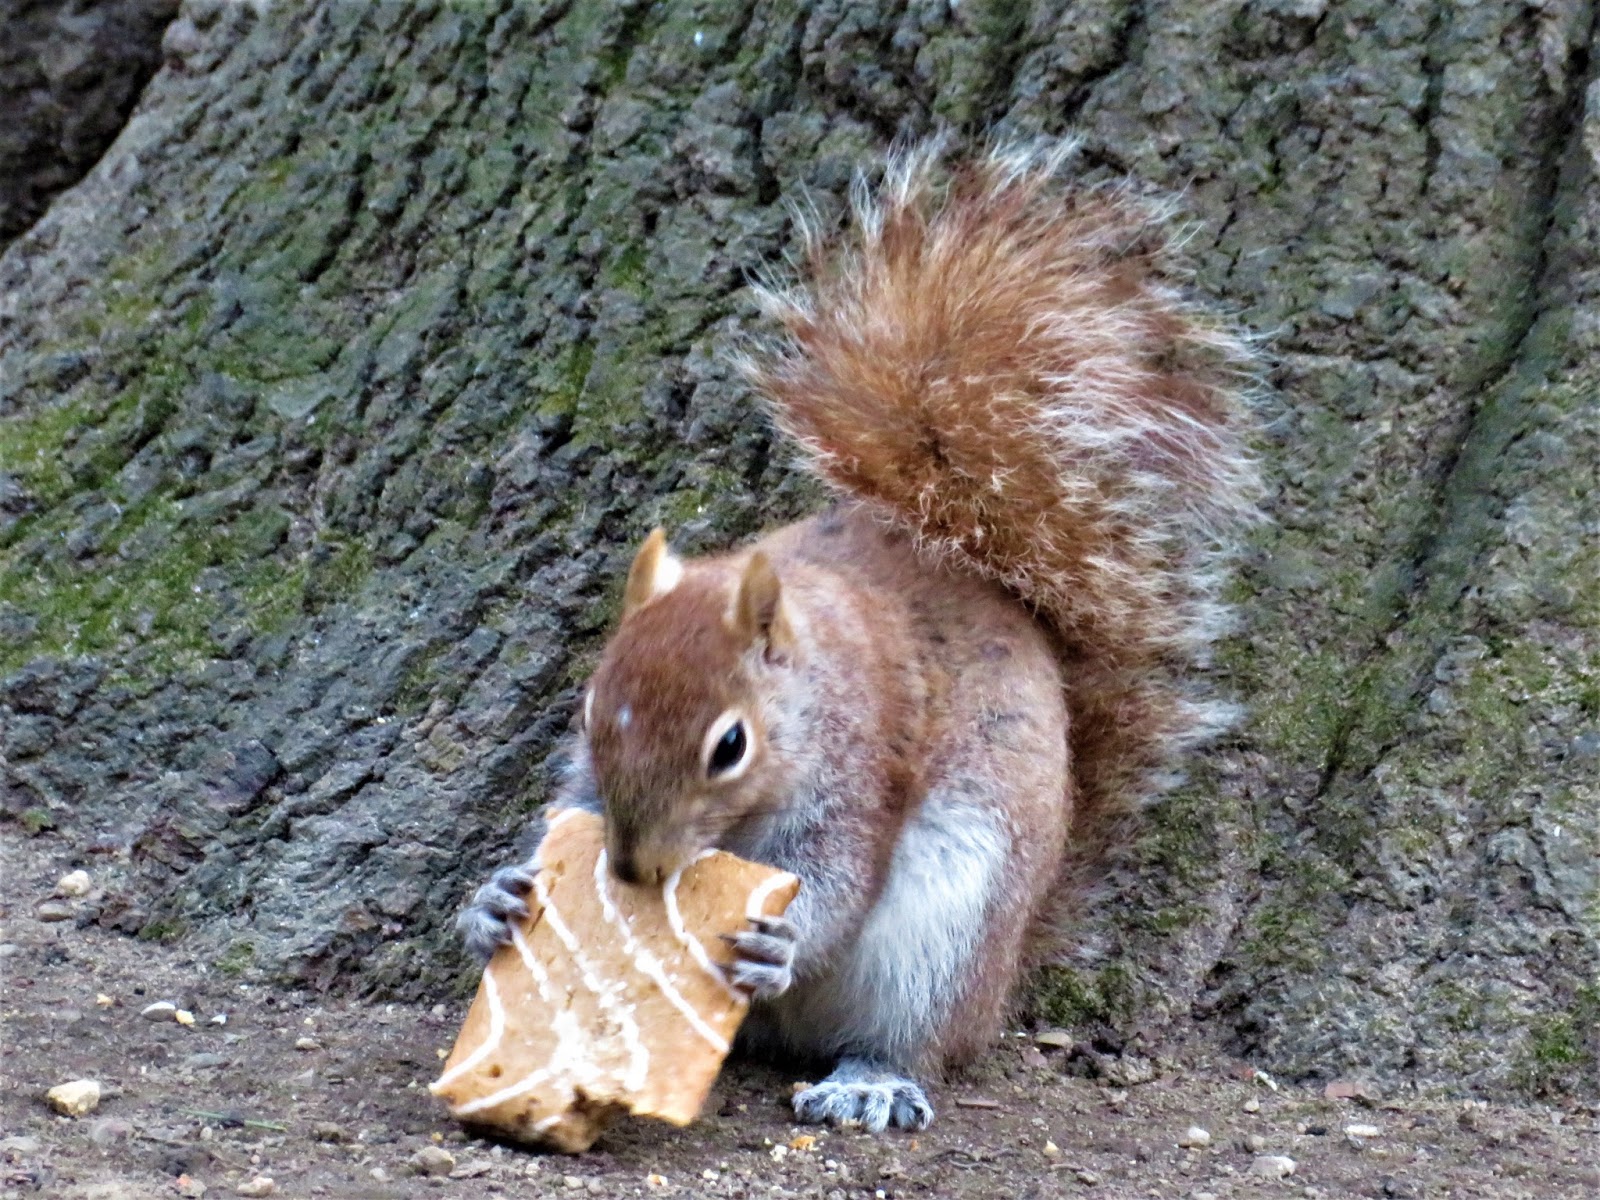 EV Grieve: Today in photos of a squirrel eating a Toaster Strudel in ...